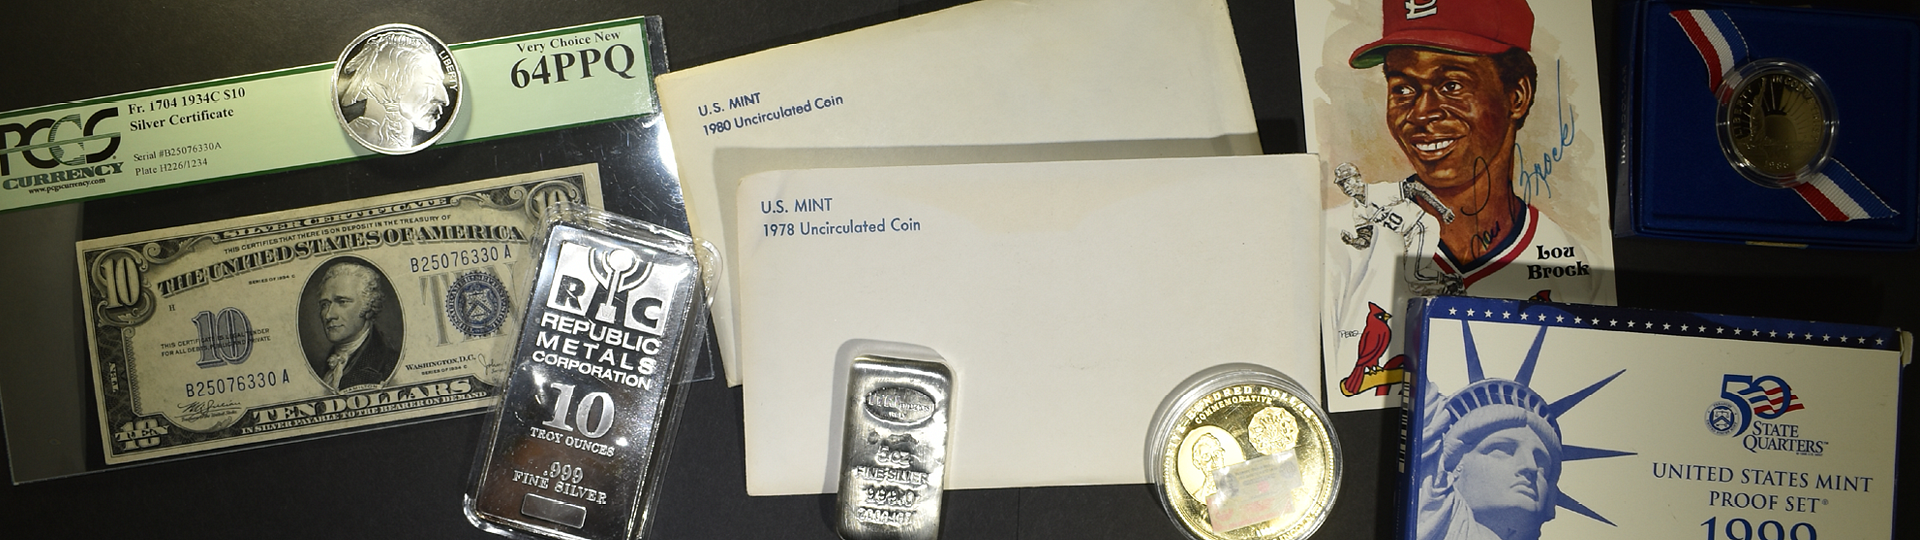 June 13th Silver City Rare Coins & Currency by Silver City Auctions